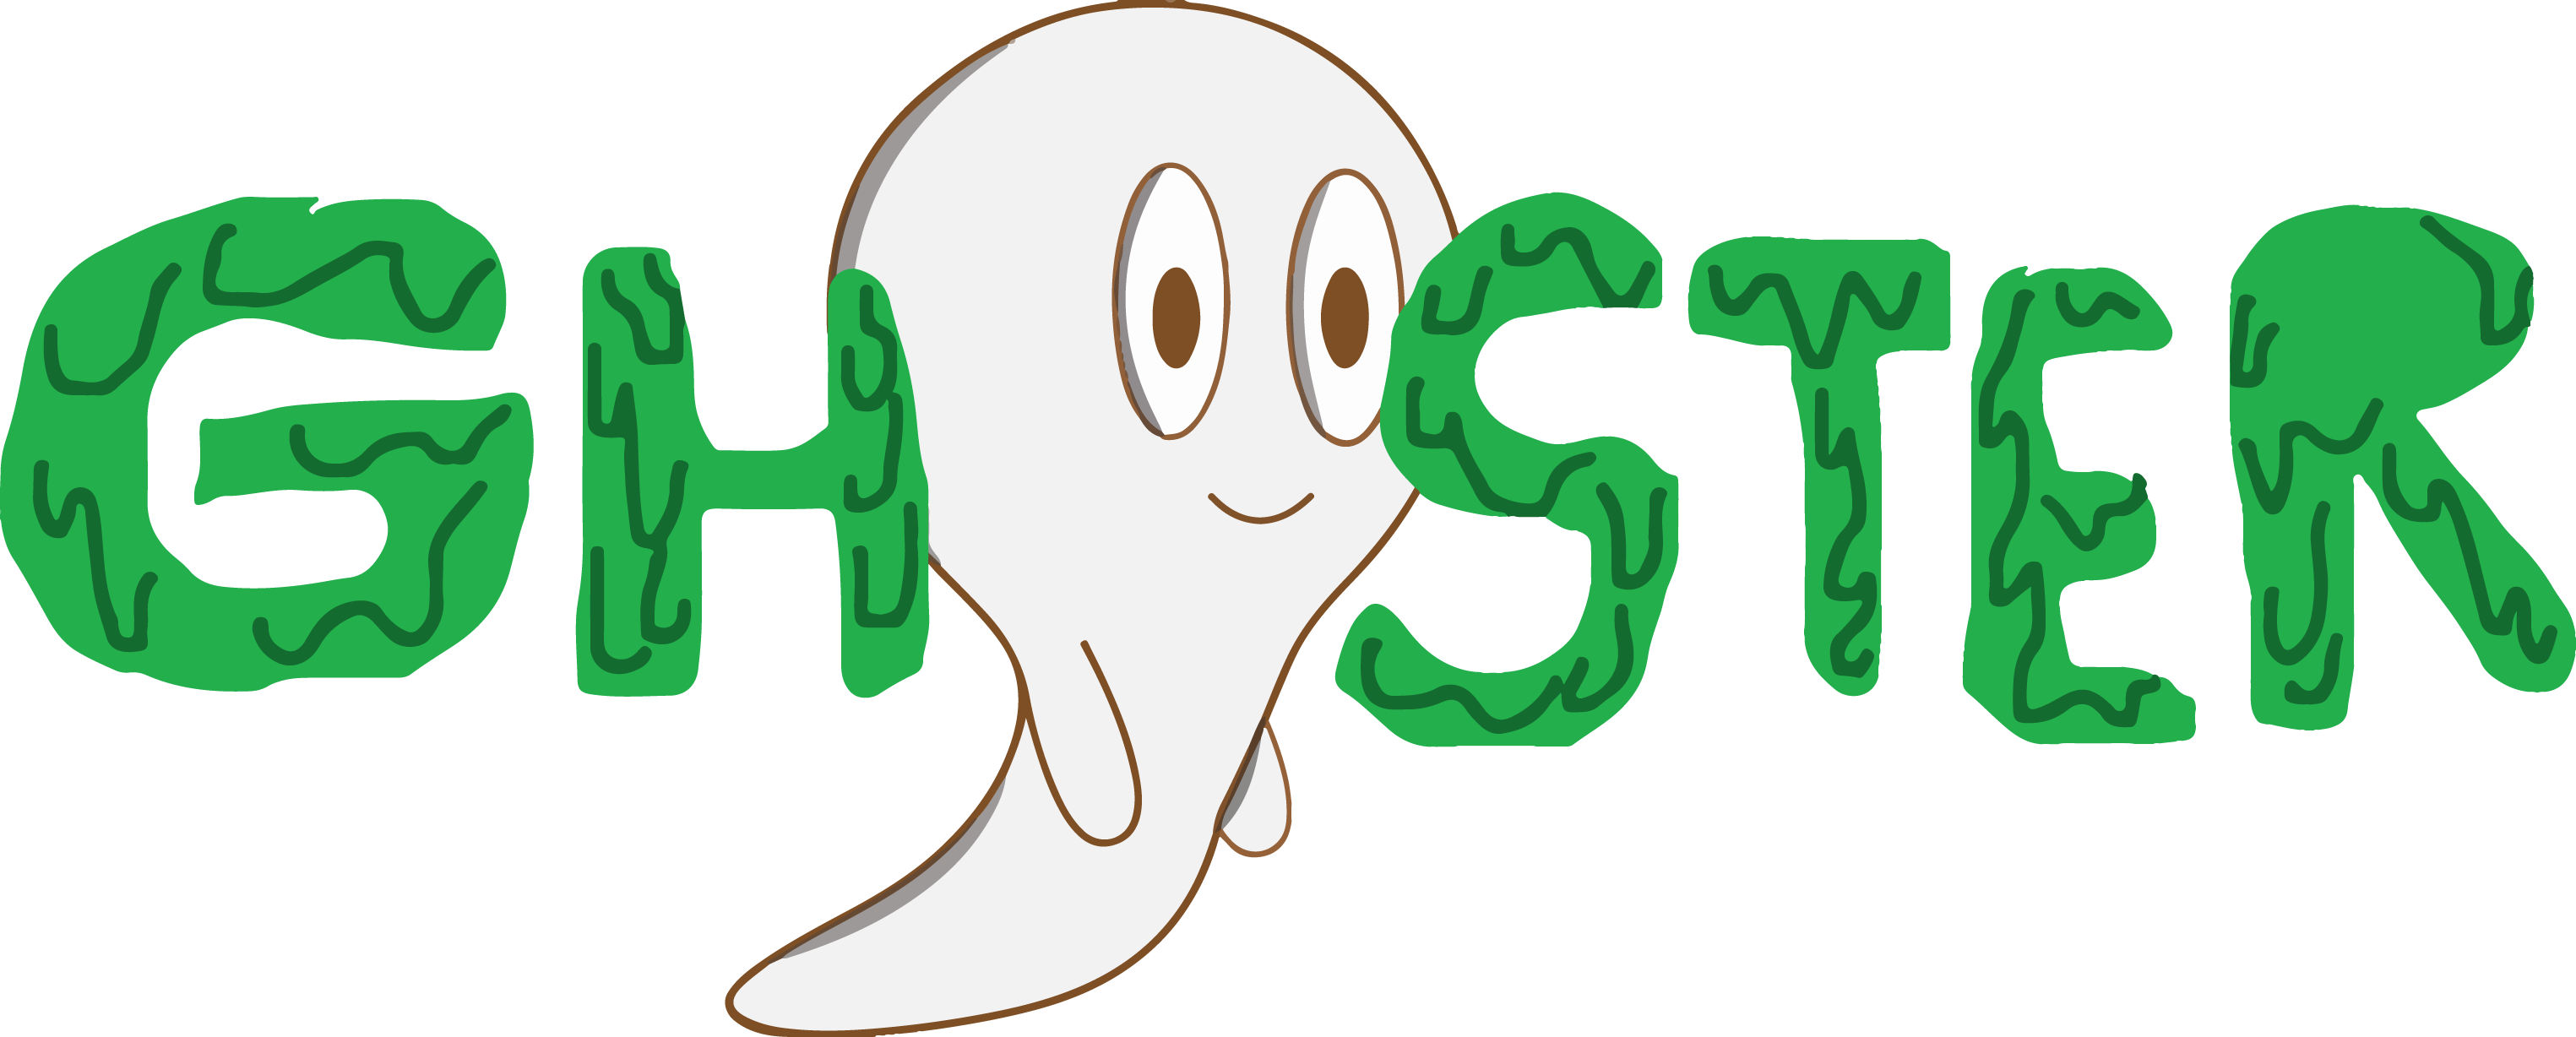 Ghoster!